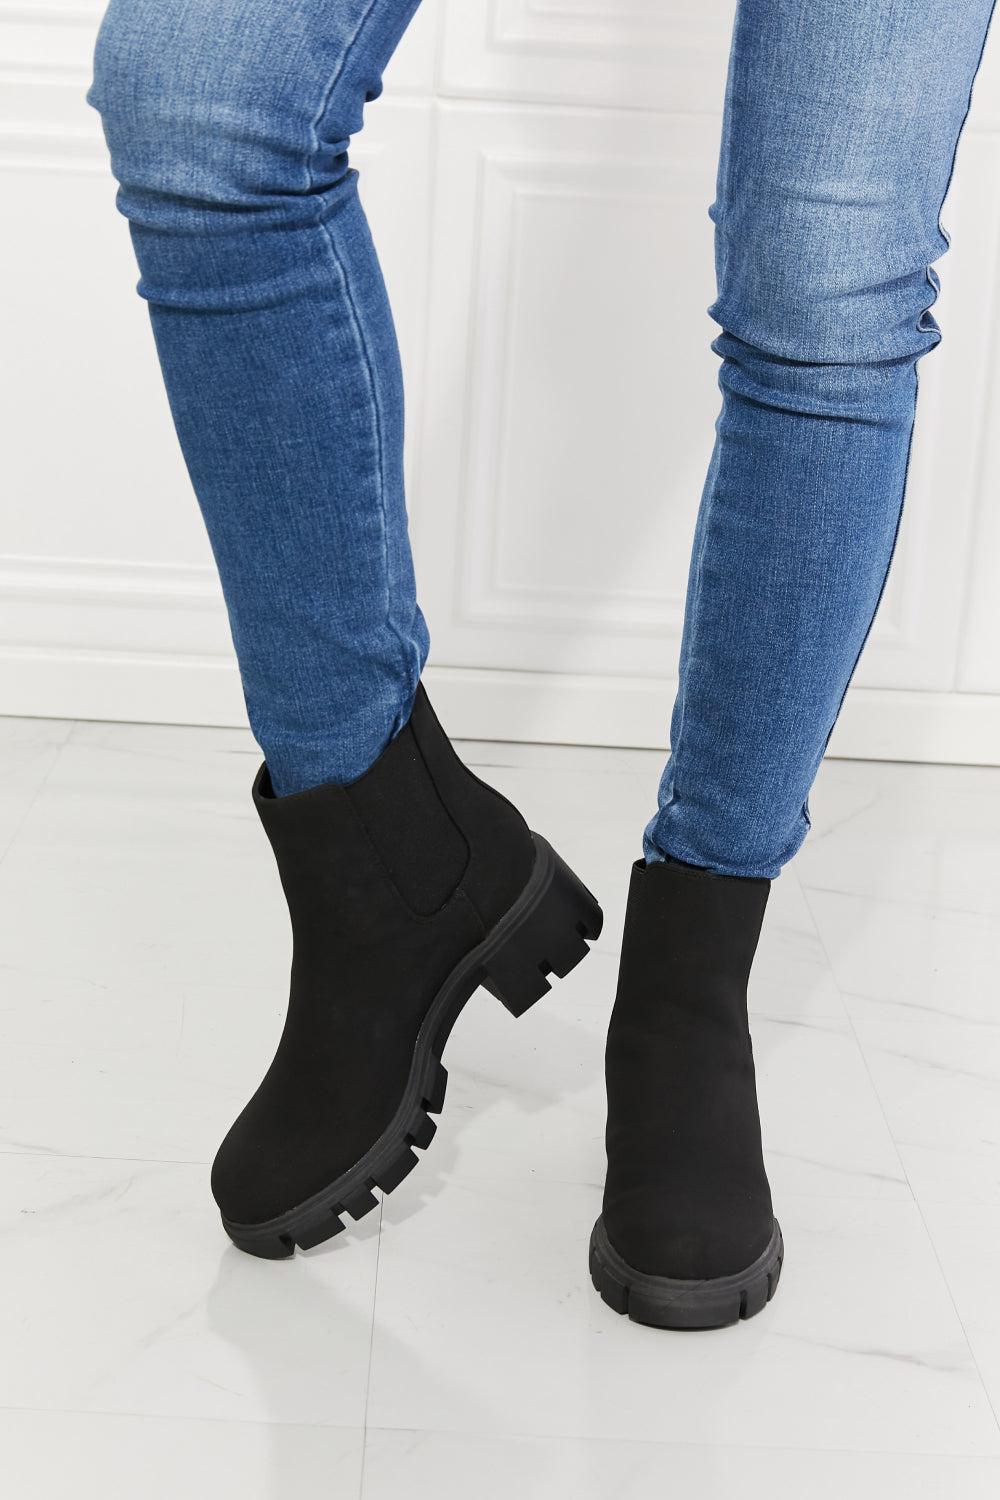 MMShoes Work For It Matte Lug Sole Chelsea Boots in Black BLUE ZONE PLANET